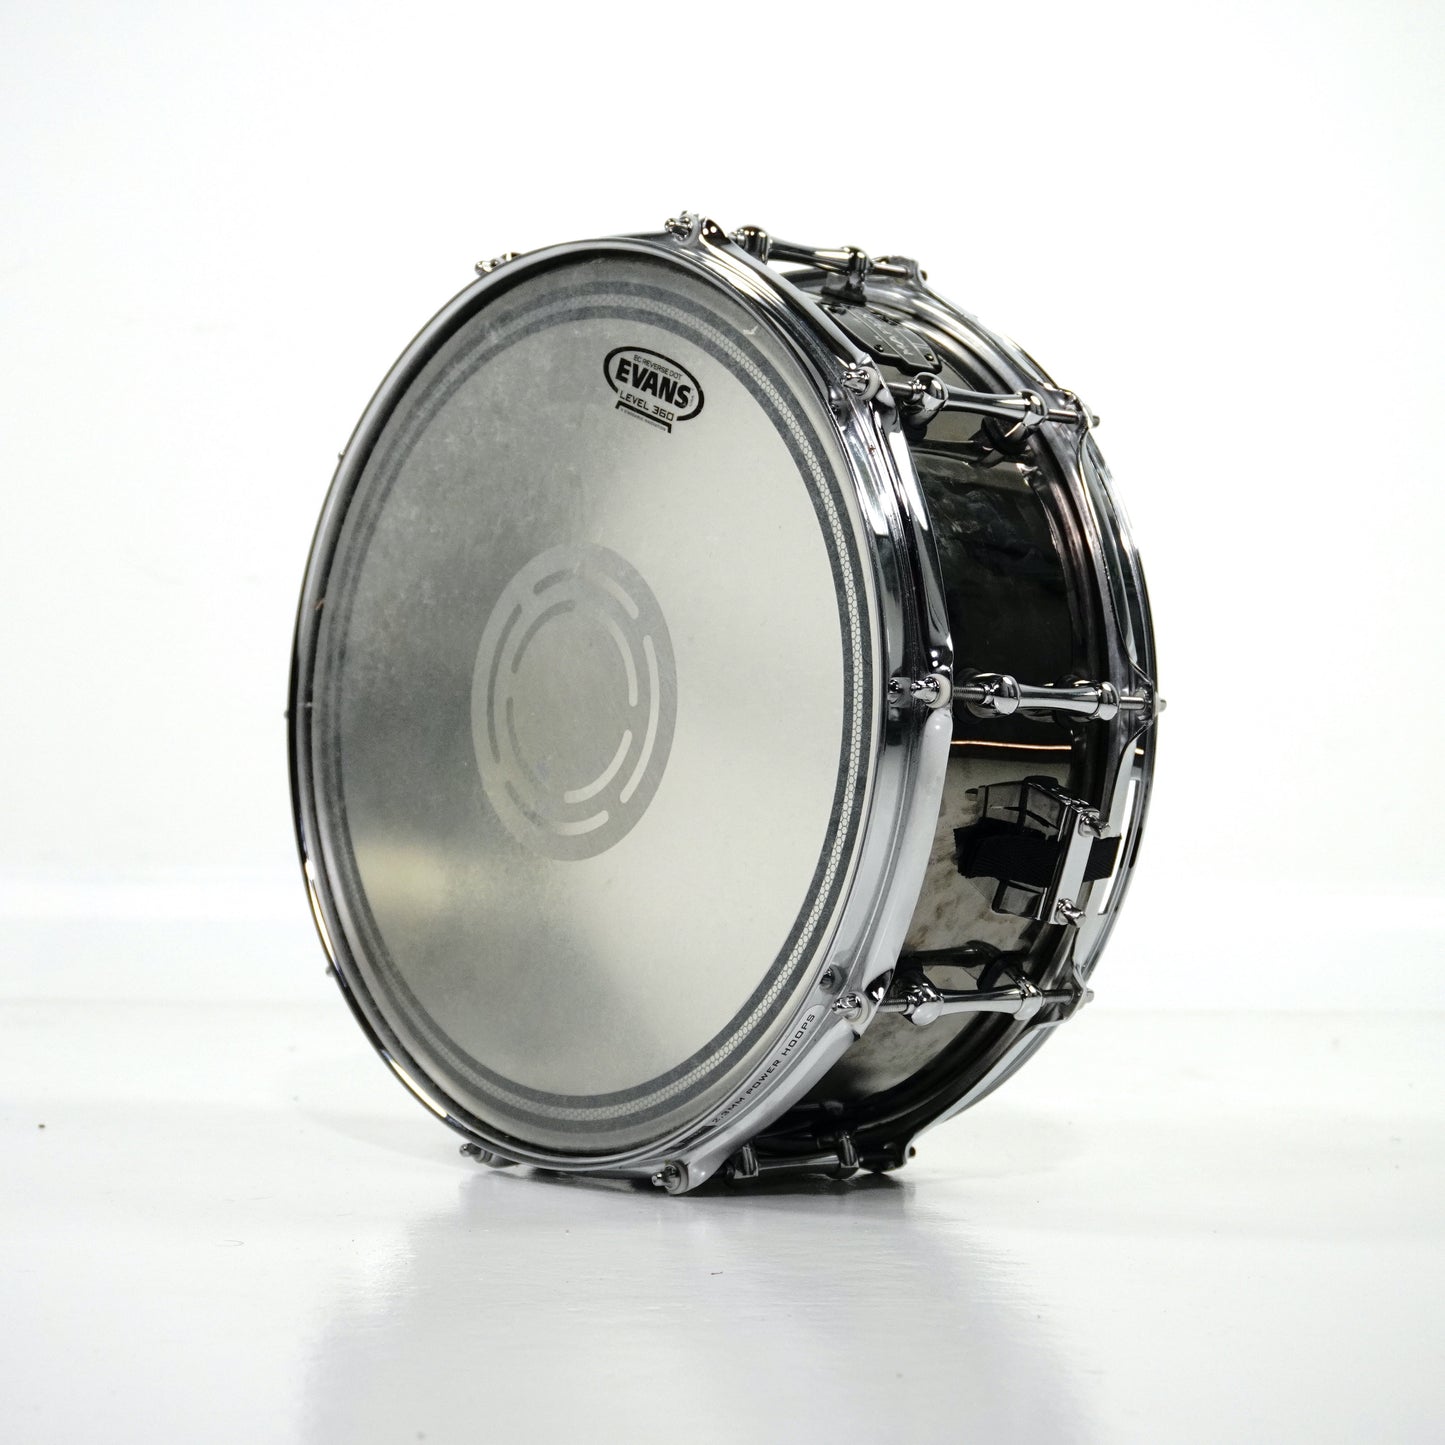 Mapex 14” x 5.5” Armory Tomahawk Snare Drum in Black